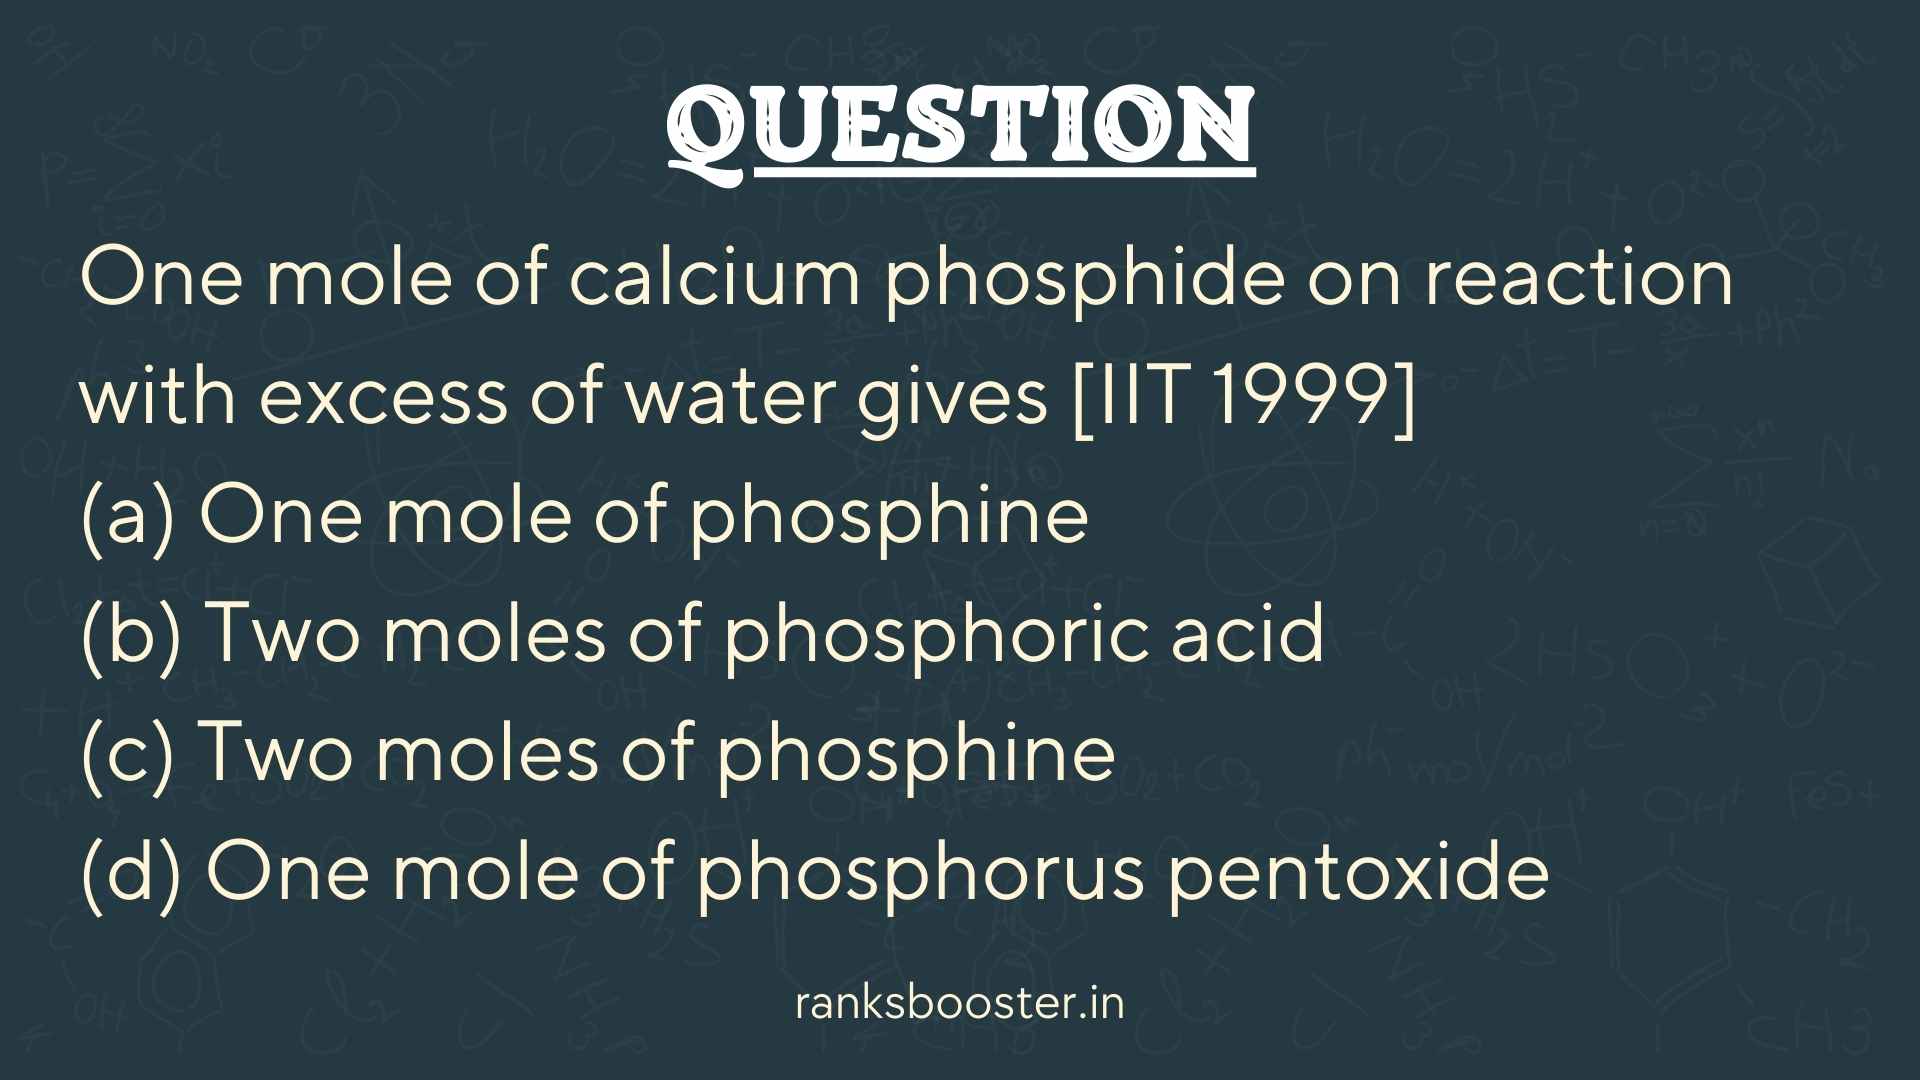 One mole of calcium phosphide on reaction with excess of water gives [IIT 1999] (a) One mole of phosphine (b) Two moles of phosphoric acid (c) Two moles of phosphine (d) One mole of phosphorus pentoxide